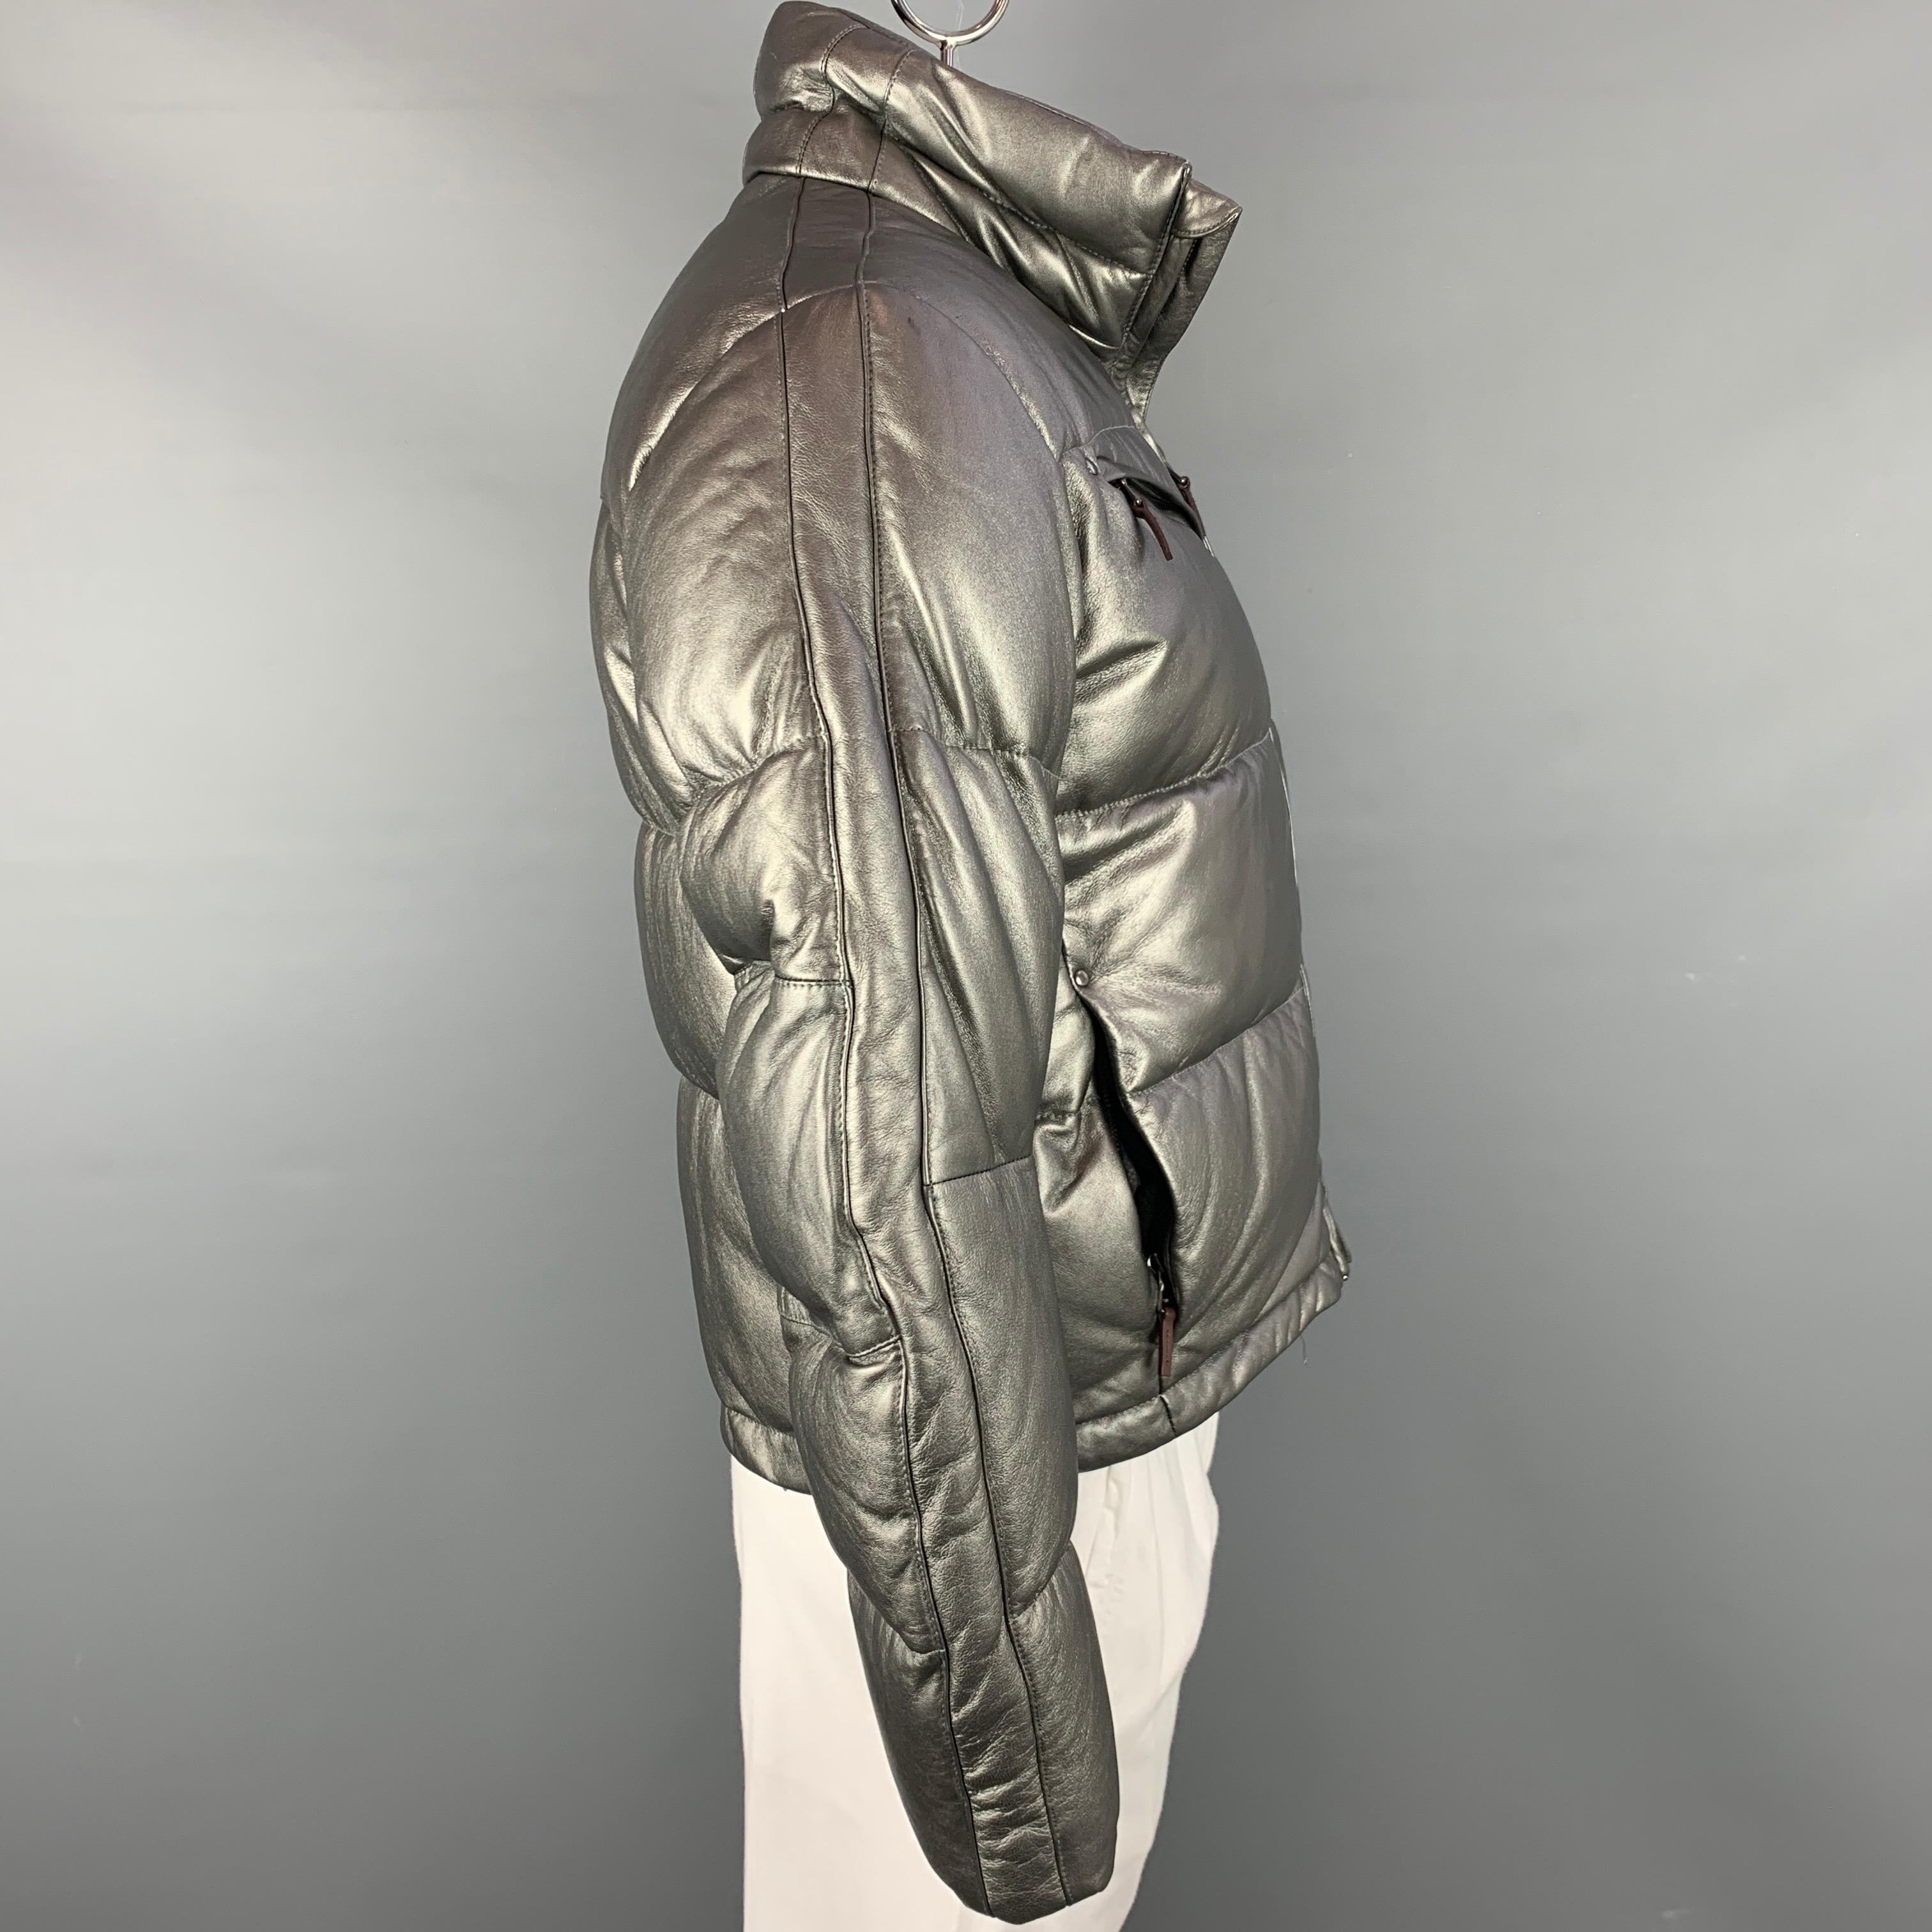 RLX by RALPH LAUREN jacket comes in a silver metallic quilted leather featuring a high collar, slit pockets, and a zip up closure.

New With Tags.
Marked: L

Measurements:

Shoulder: 19 in.
Chest: 46 in.
Sleeve: 26 in.
Length: 25 in.